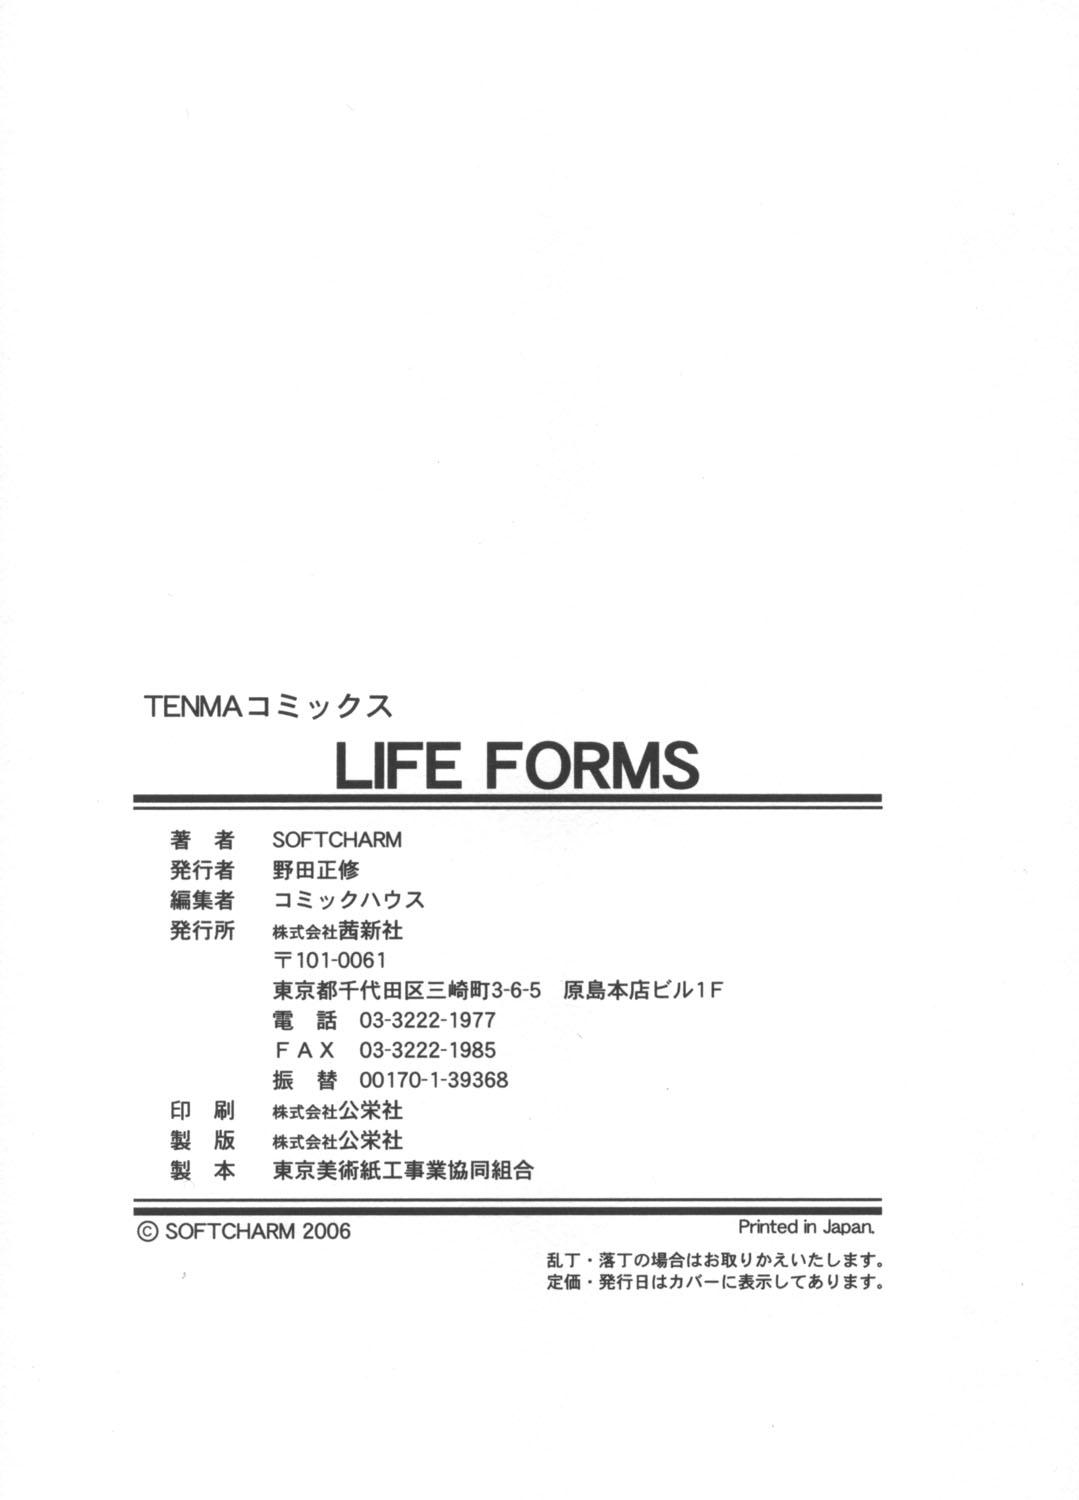 LIFE FORMS 199